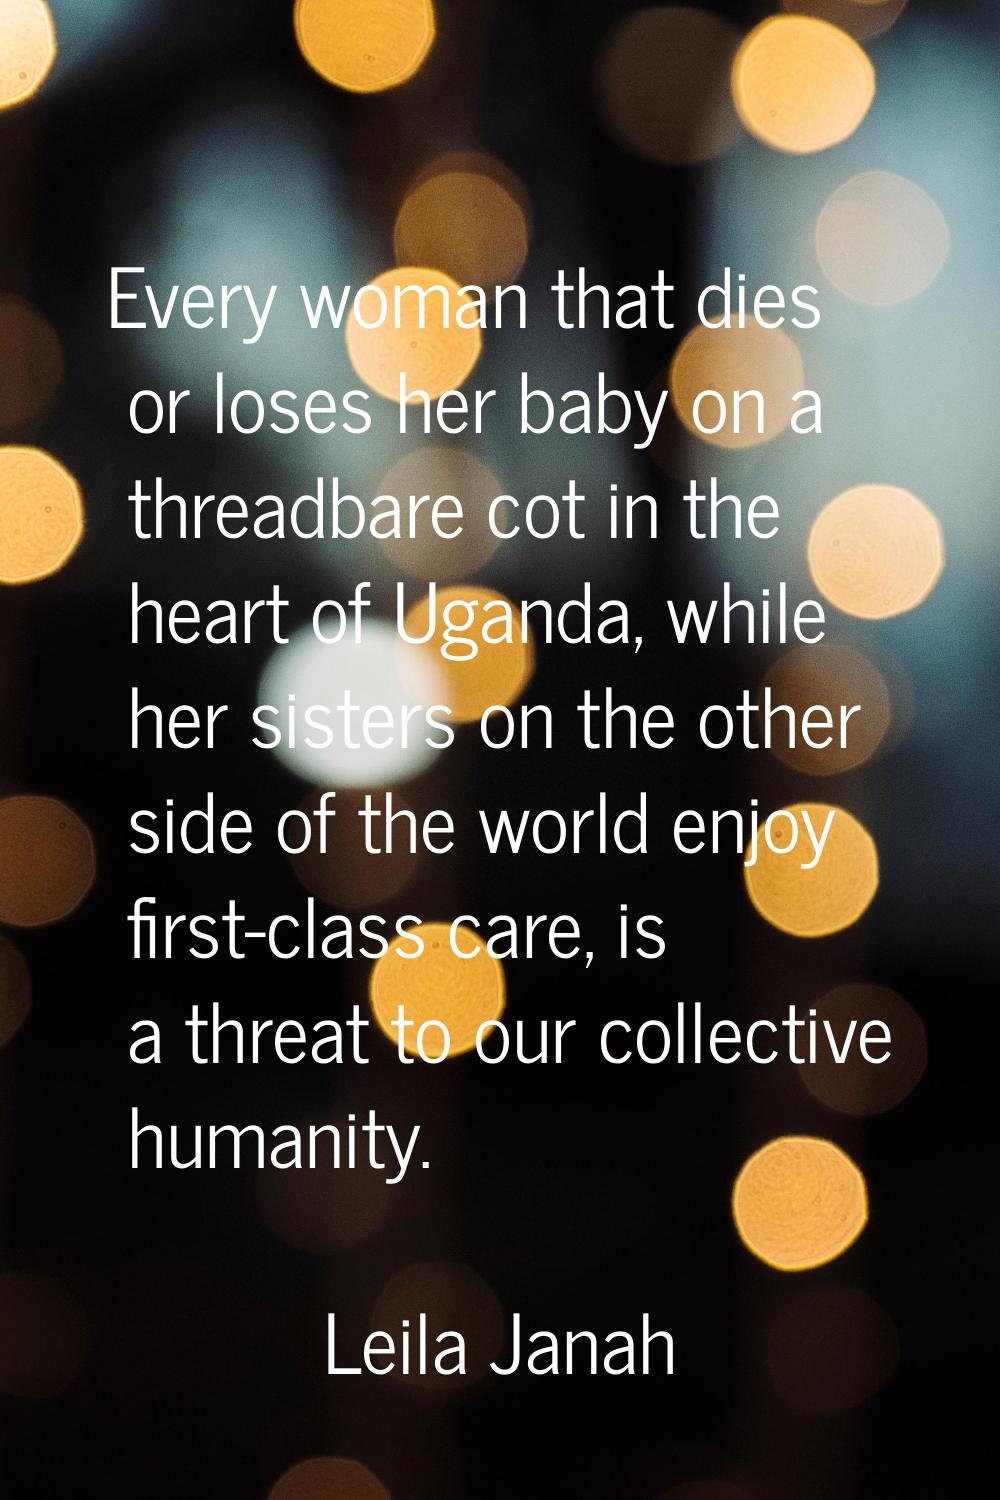 Every woman that dies or loses her baby on a threadbare cot in the heart of Uganda, while her siste